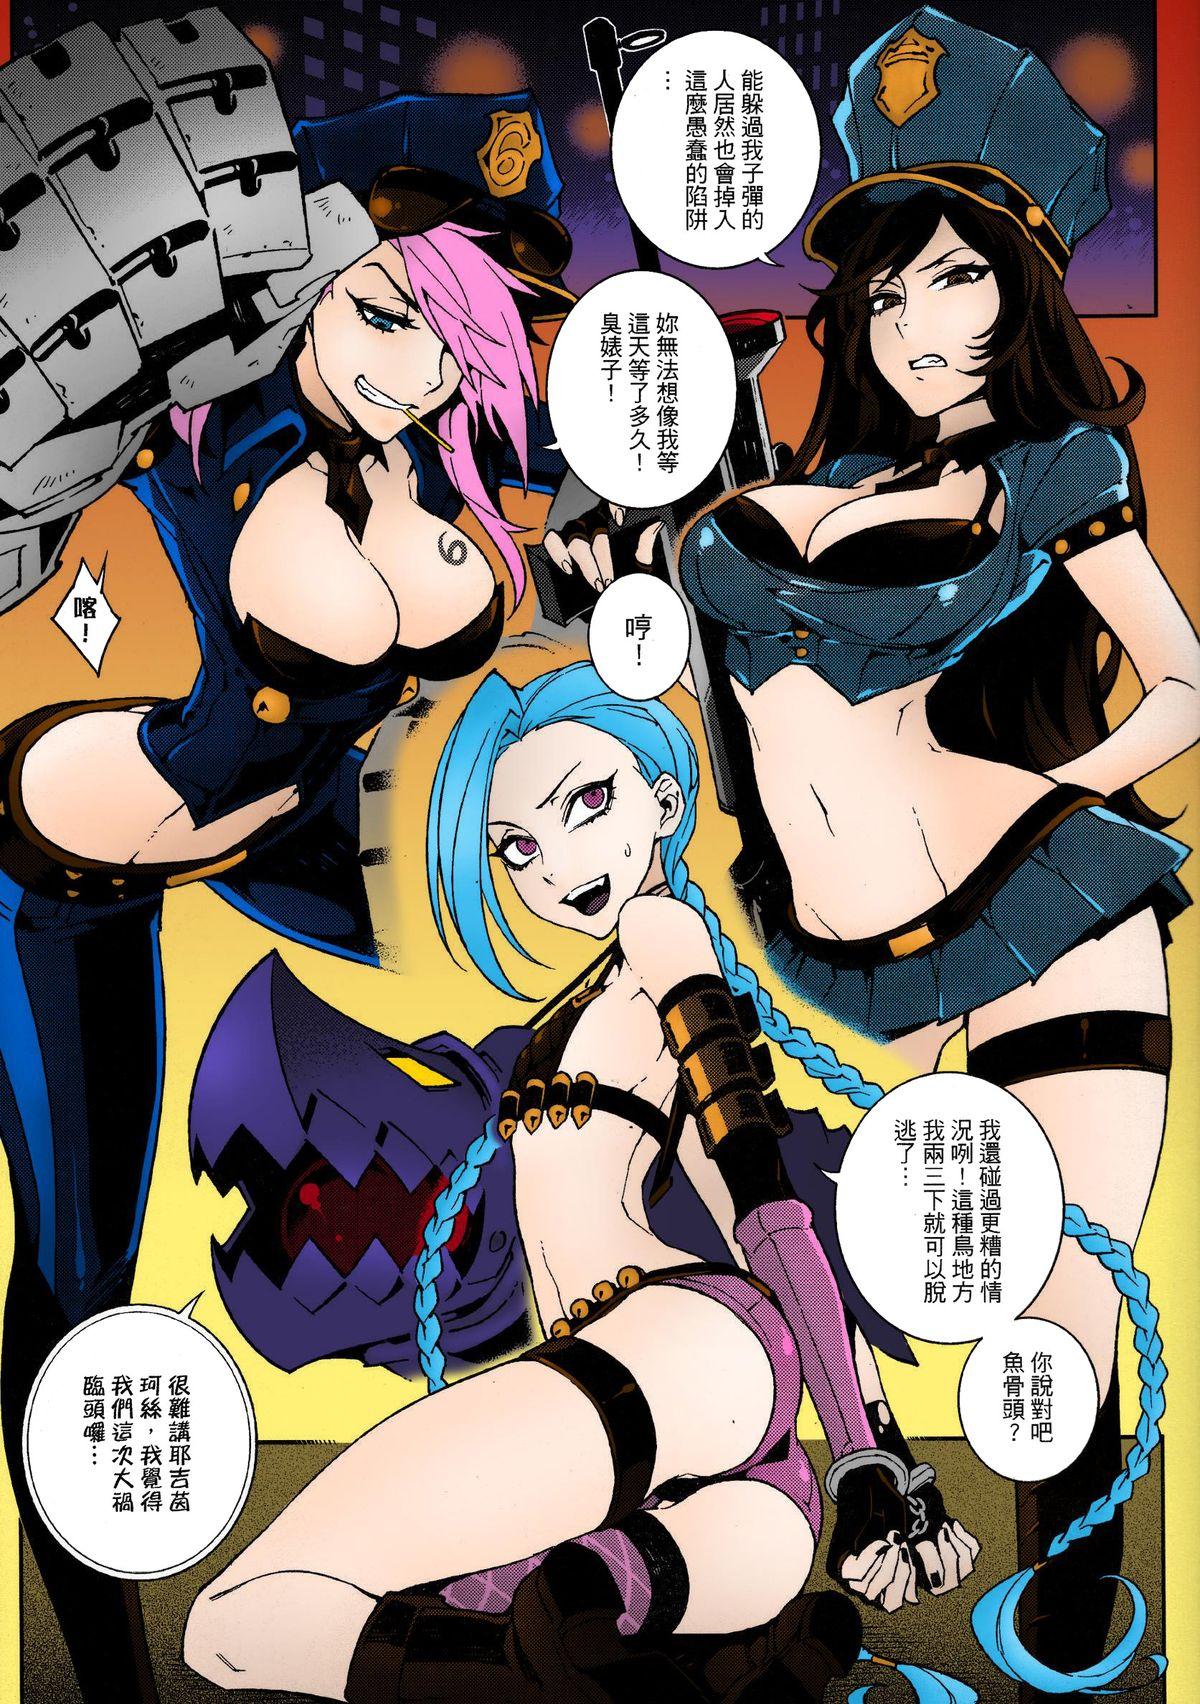 She JINX Come On! Shoot Faster - League of legends Gay Straight Boys - Page 4